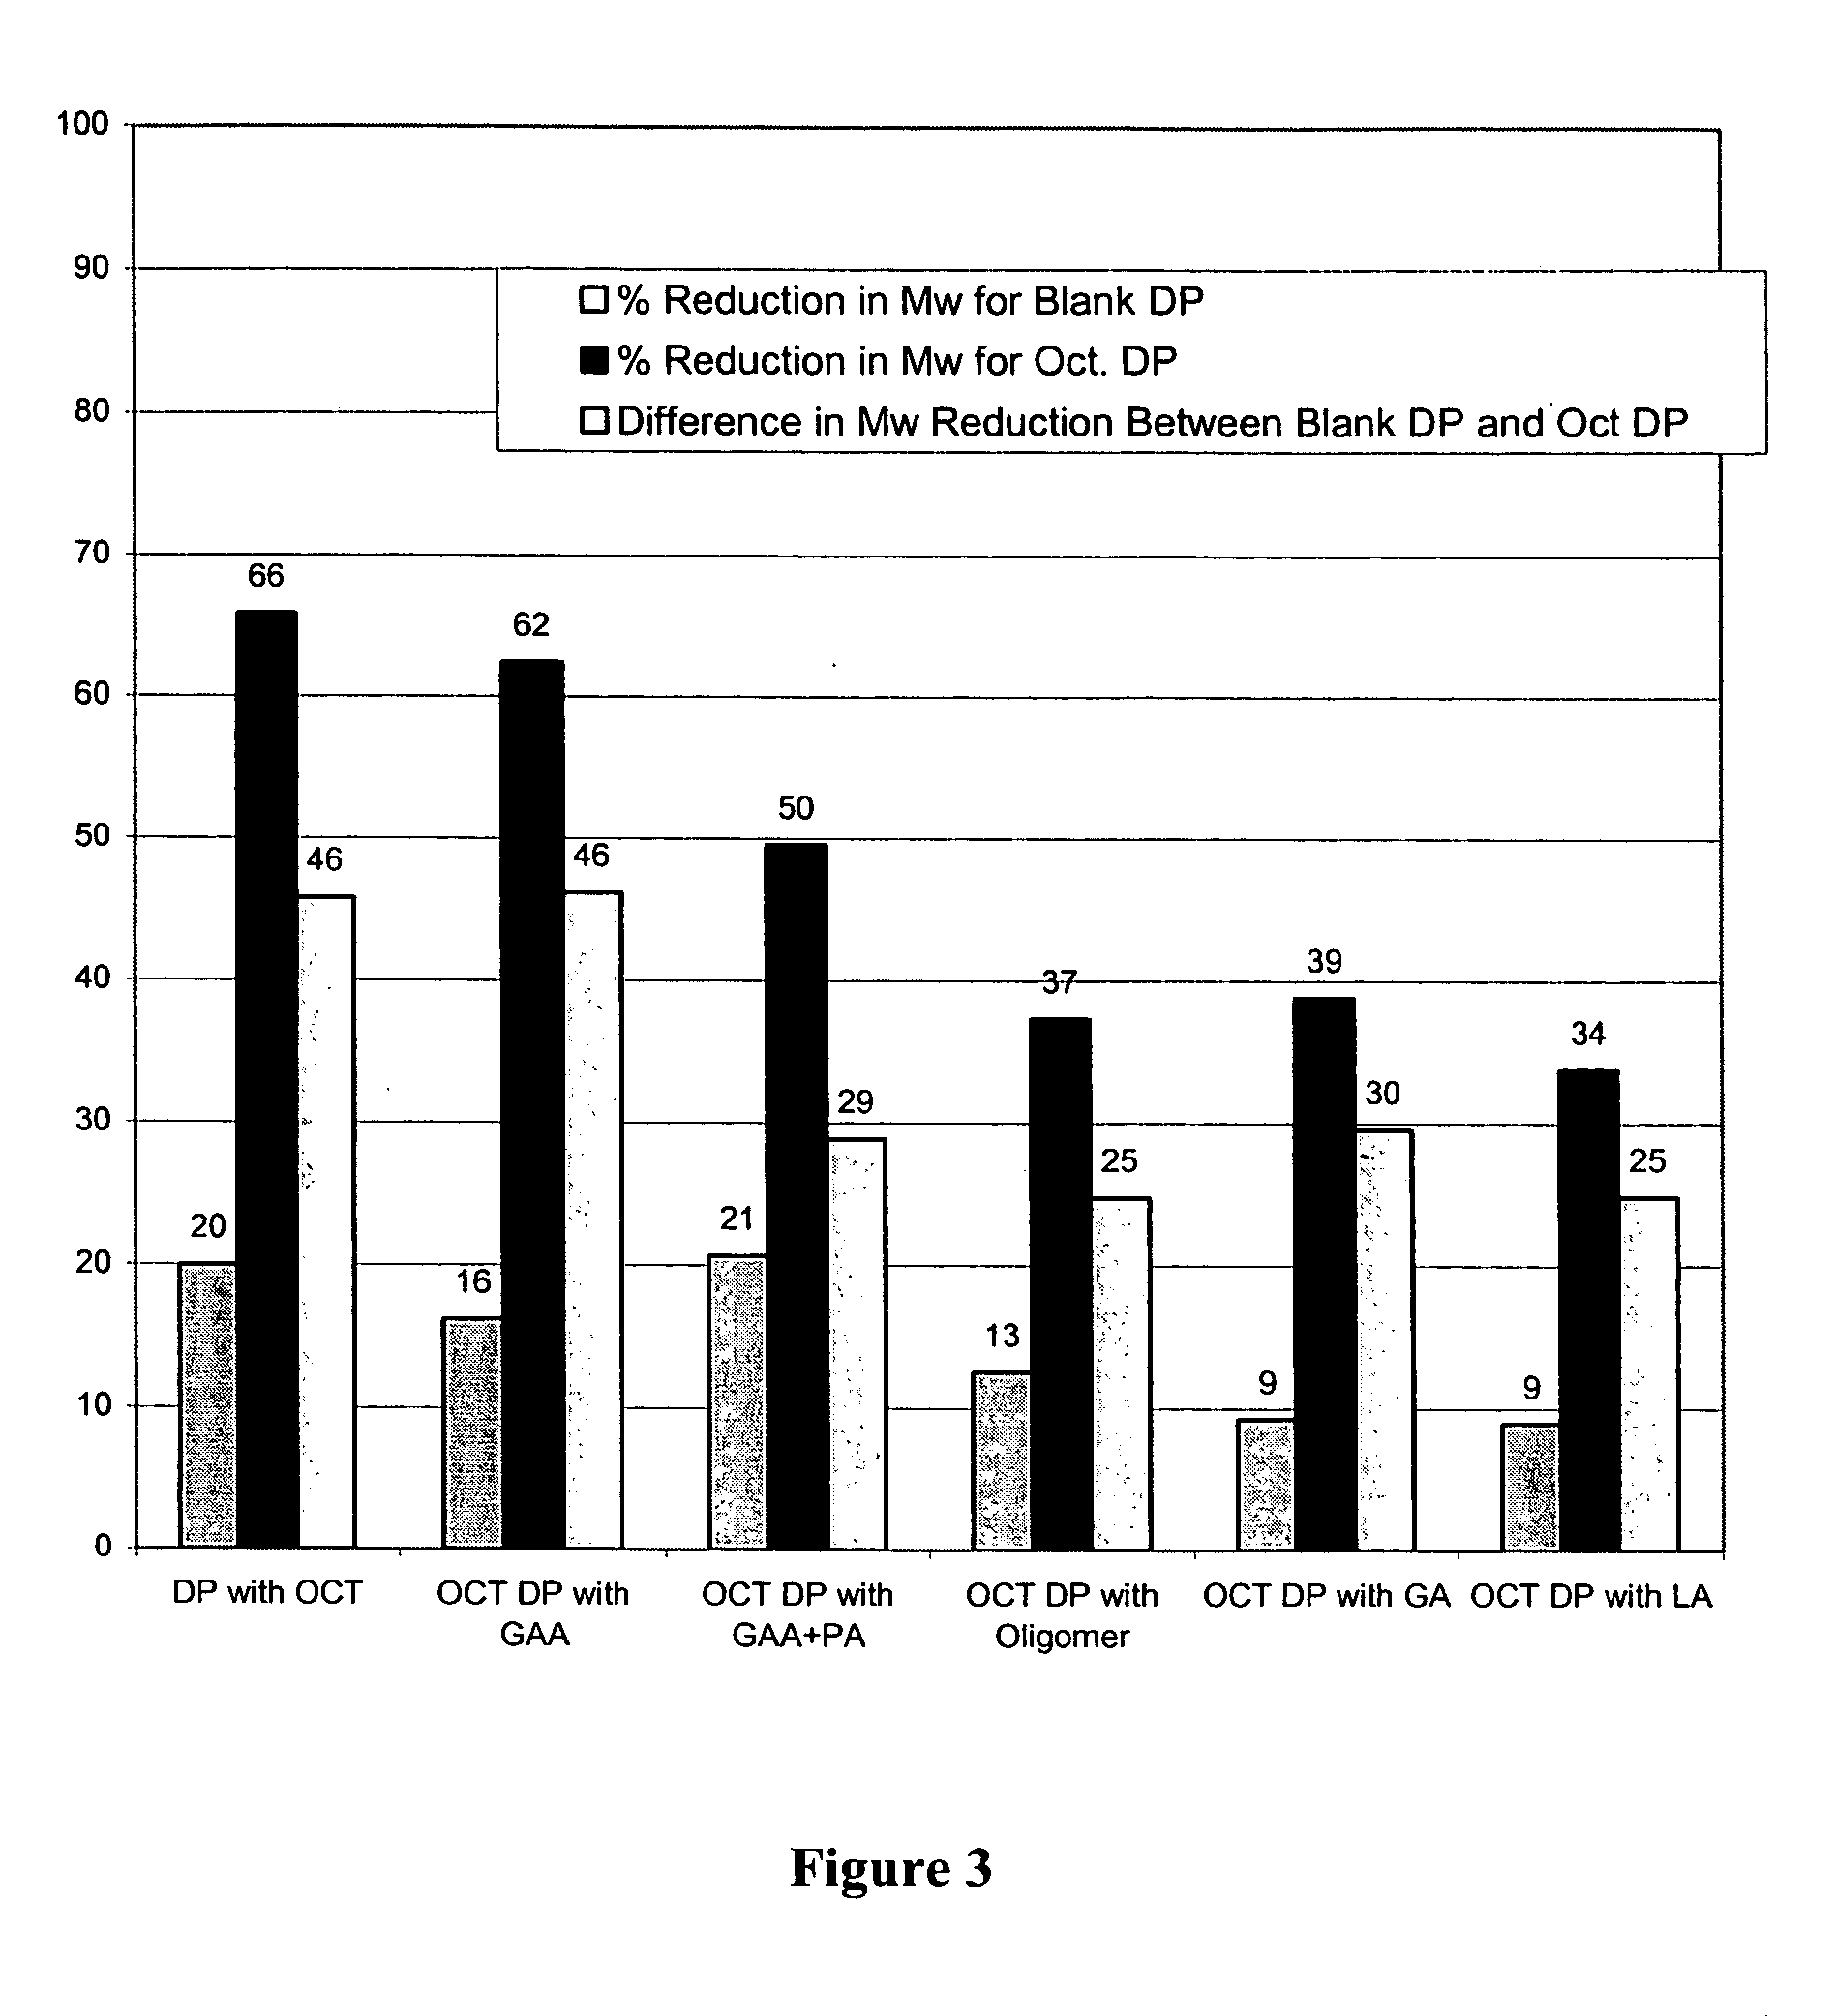 Prevention of molecular weight reduction of the polymer, impurity formation and gelling in polymer compositions